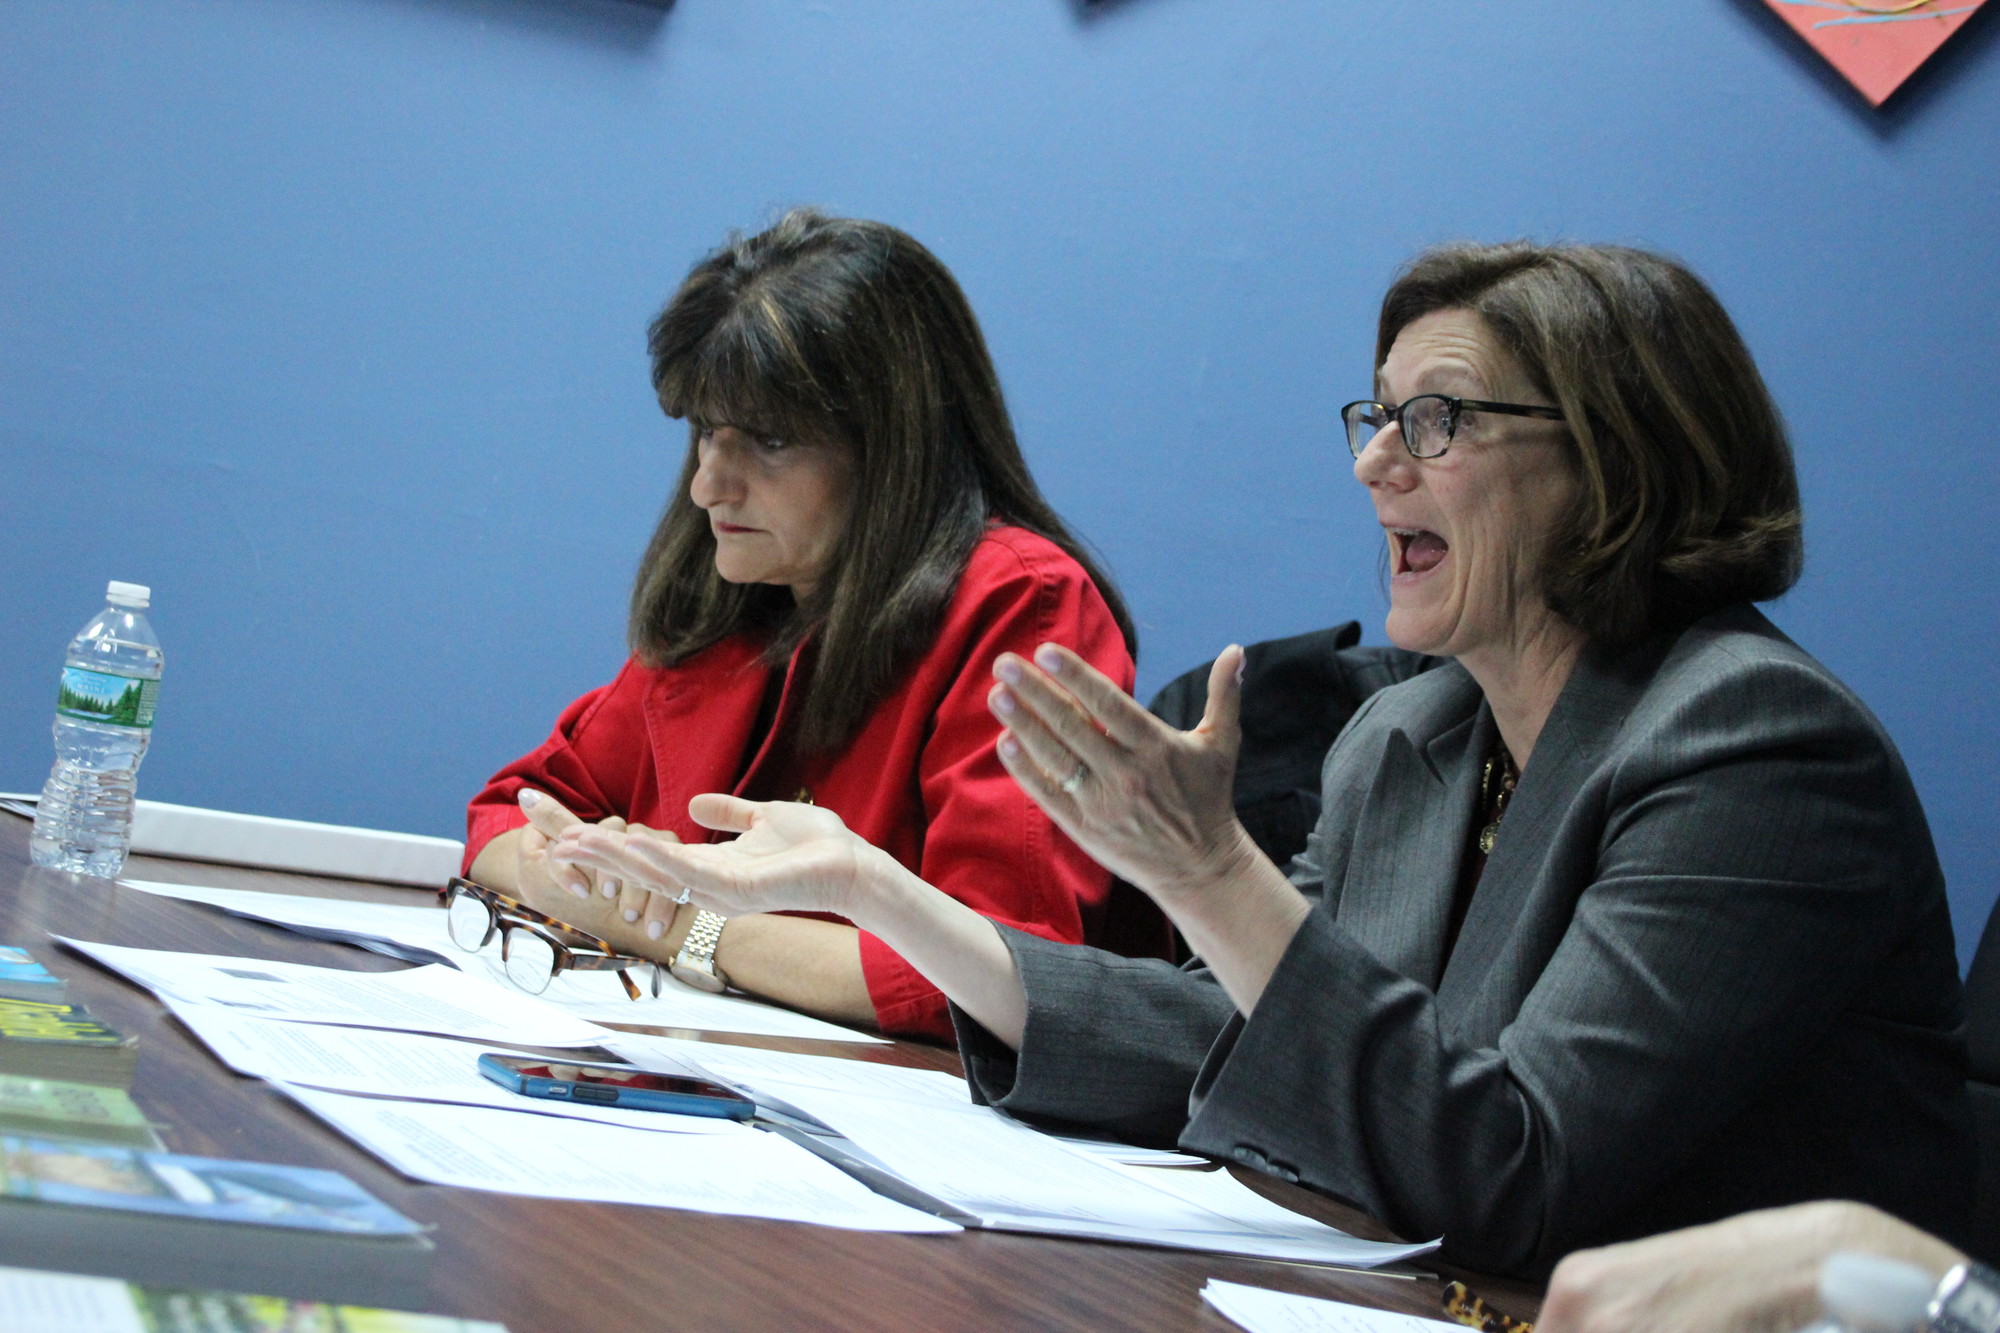 Eilleen Buckley, at right, an education attorney at Long Island Advocacy Center in Central Islip, was part of a four-person panel held at Assemblywoman Michaelle Solages’s office on April 30 to provide parents with information about their legal rights with respect to special education services.